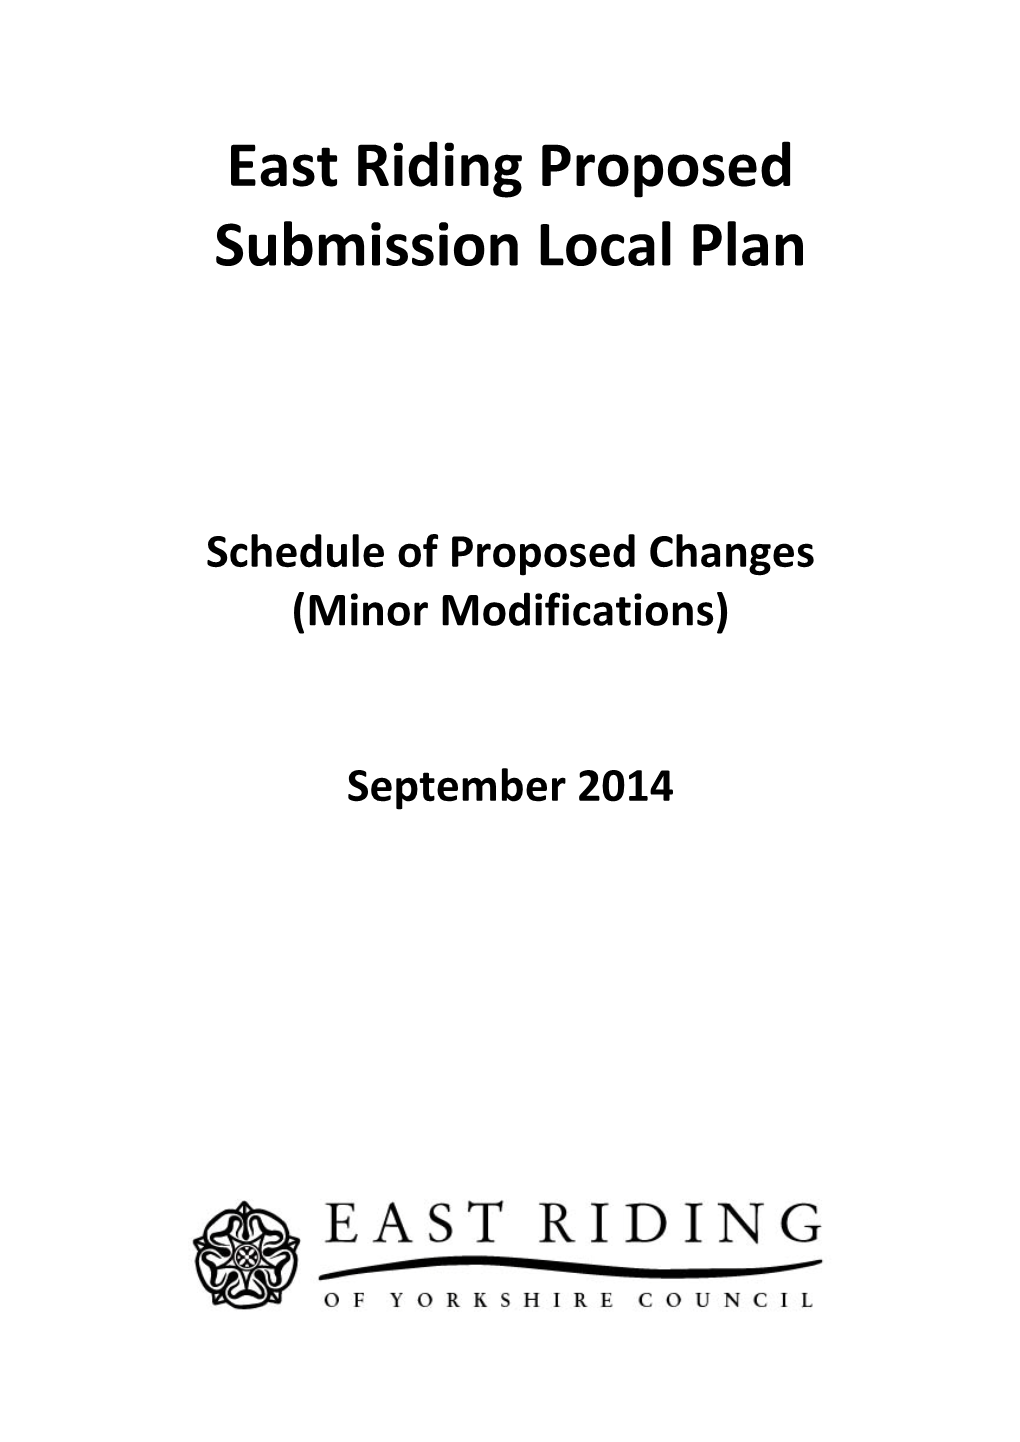 East Riding Proposed Submission Local Plan